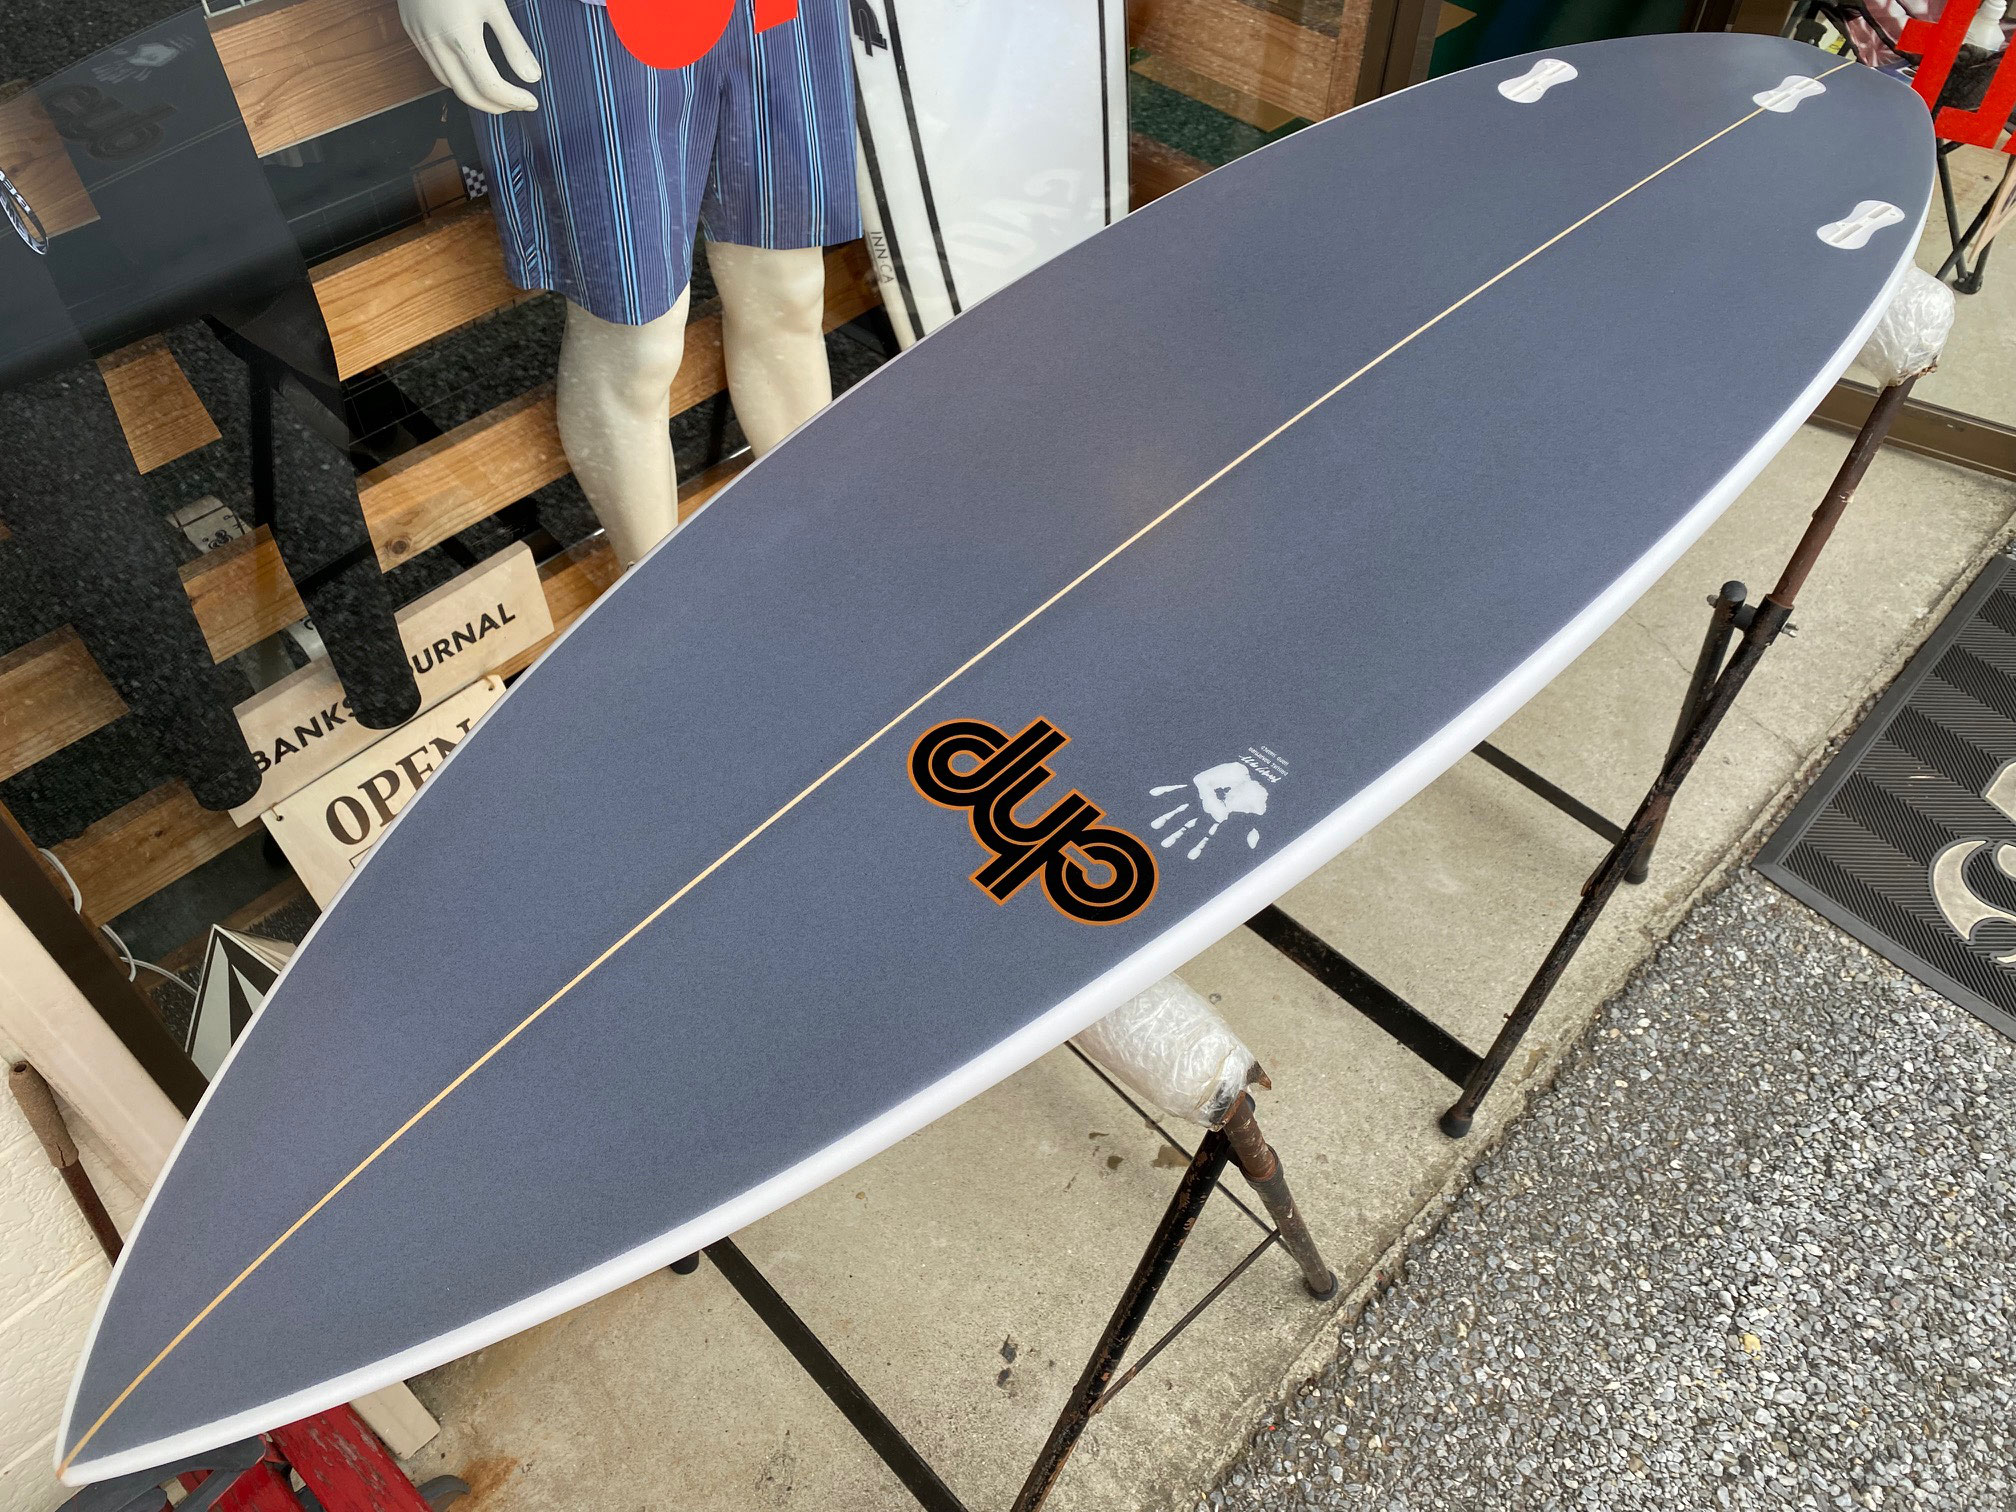 CHP WEST SURFBOARD - サーフィン